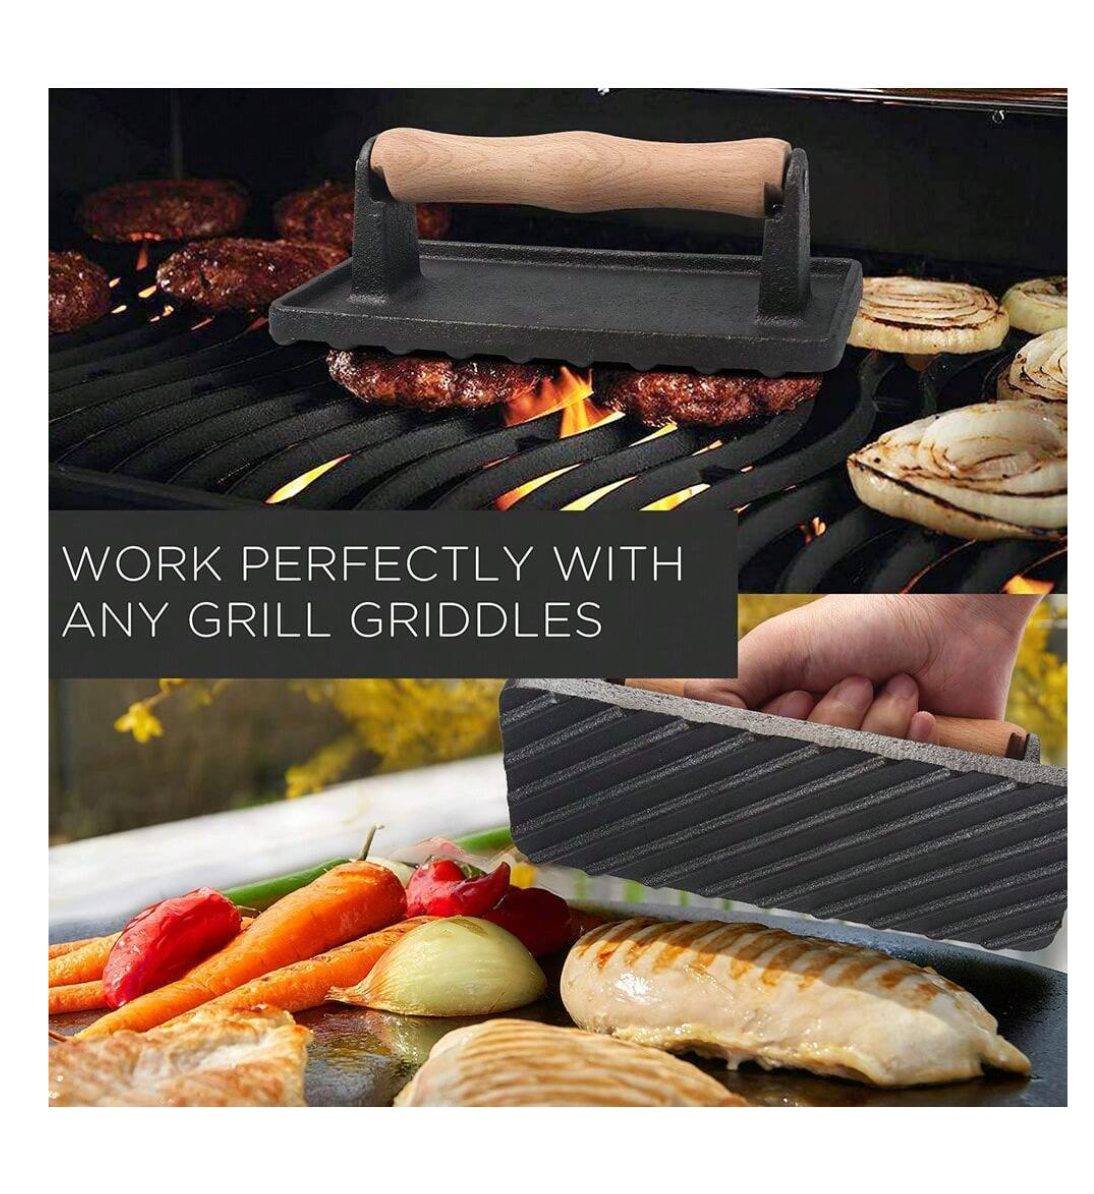 Sizzle and Press: Master the Grill with our Cast Iron Burger and Bacon Press - Your Griddle's Best Companion!